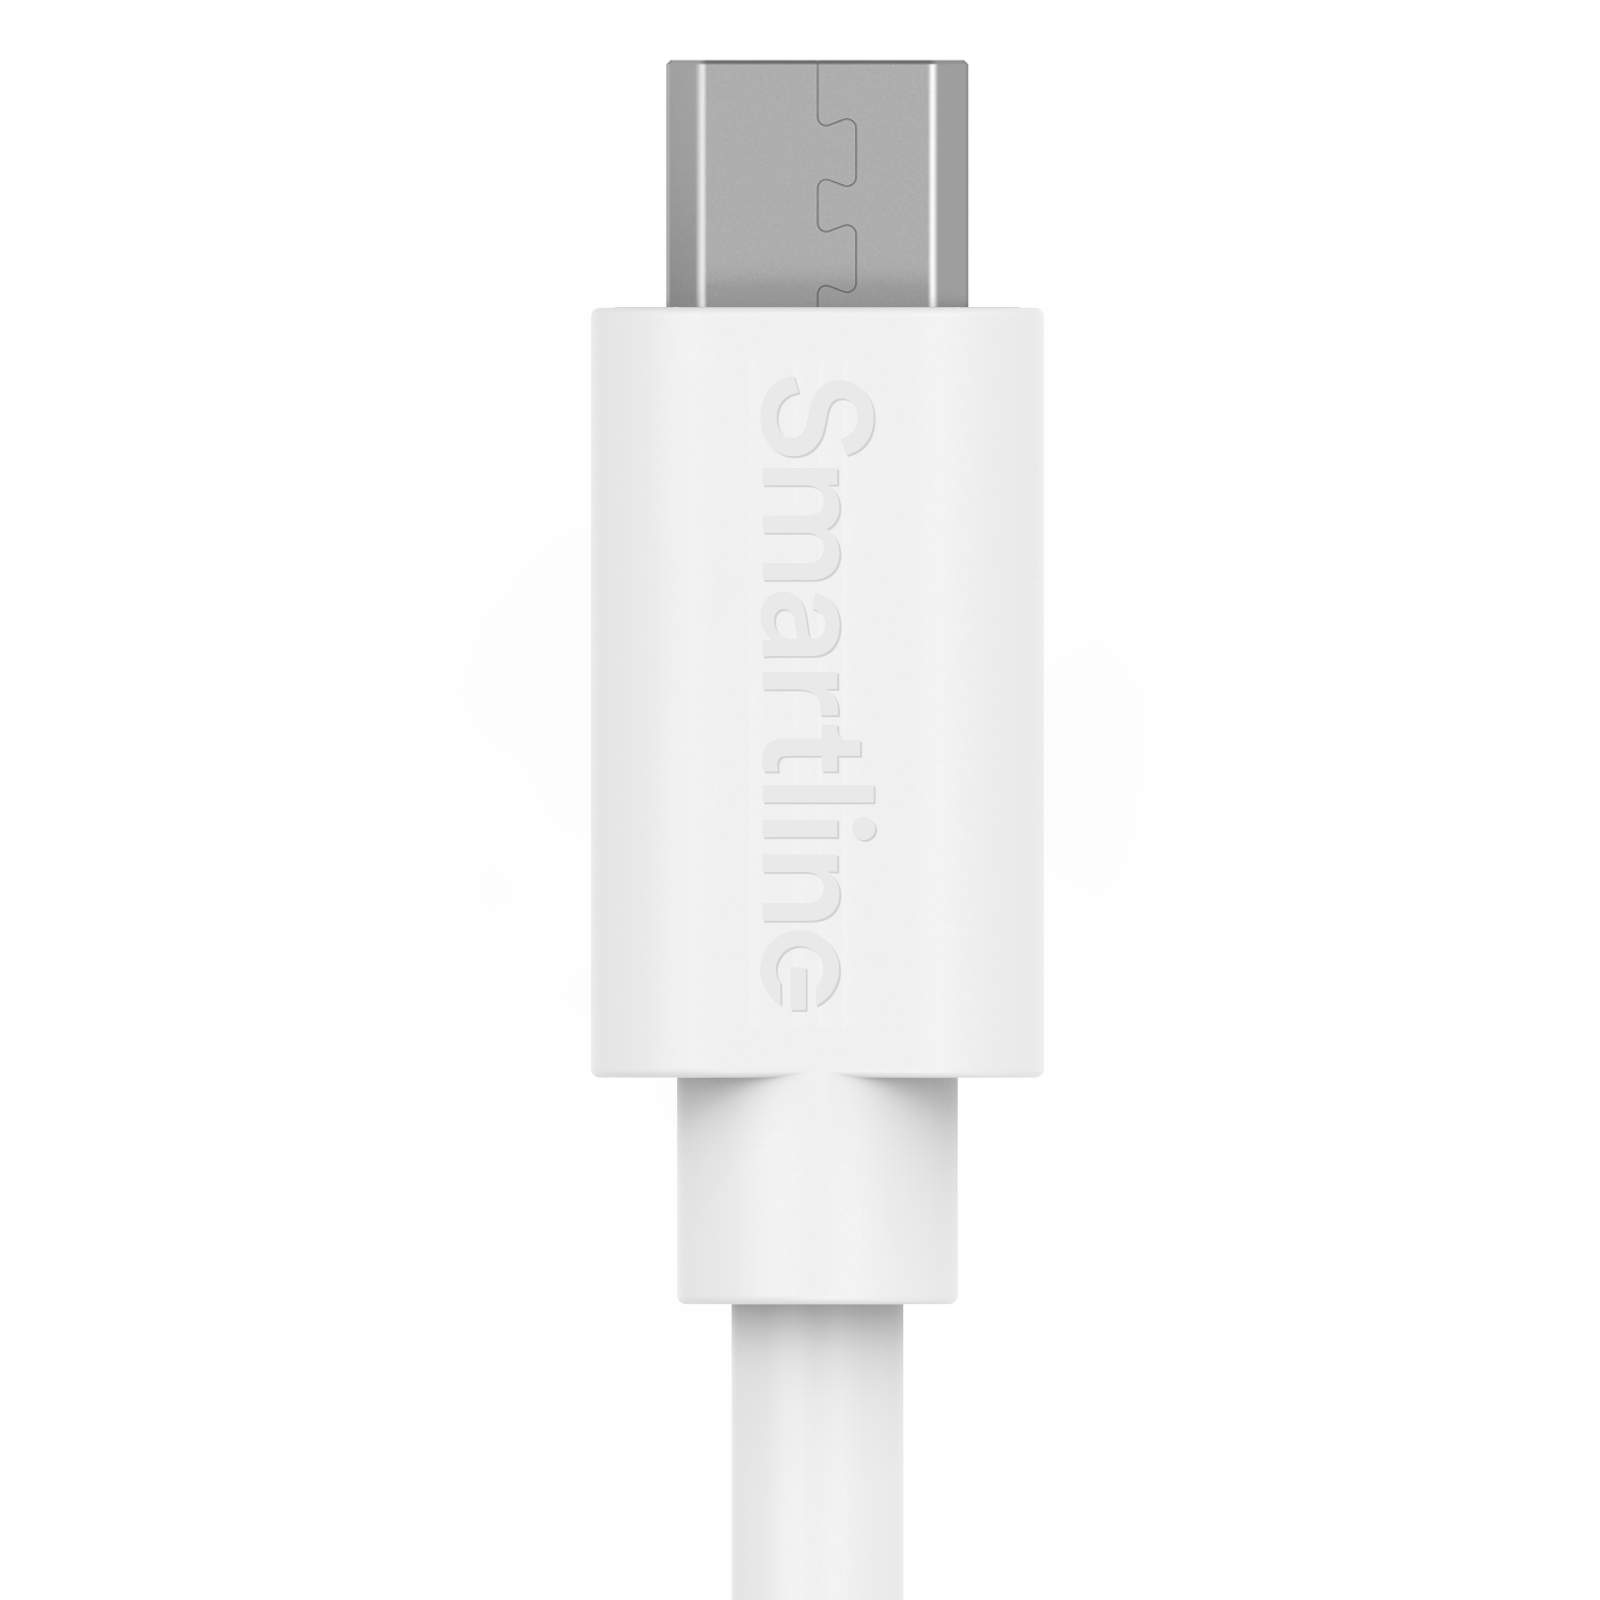 USB-A to MicroUSB Cable 1 meter White